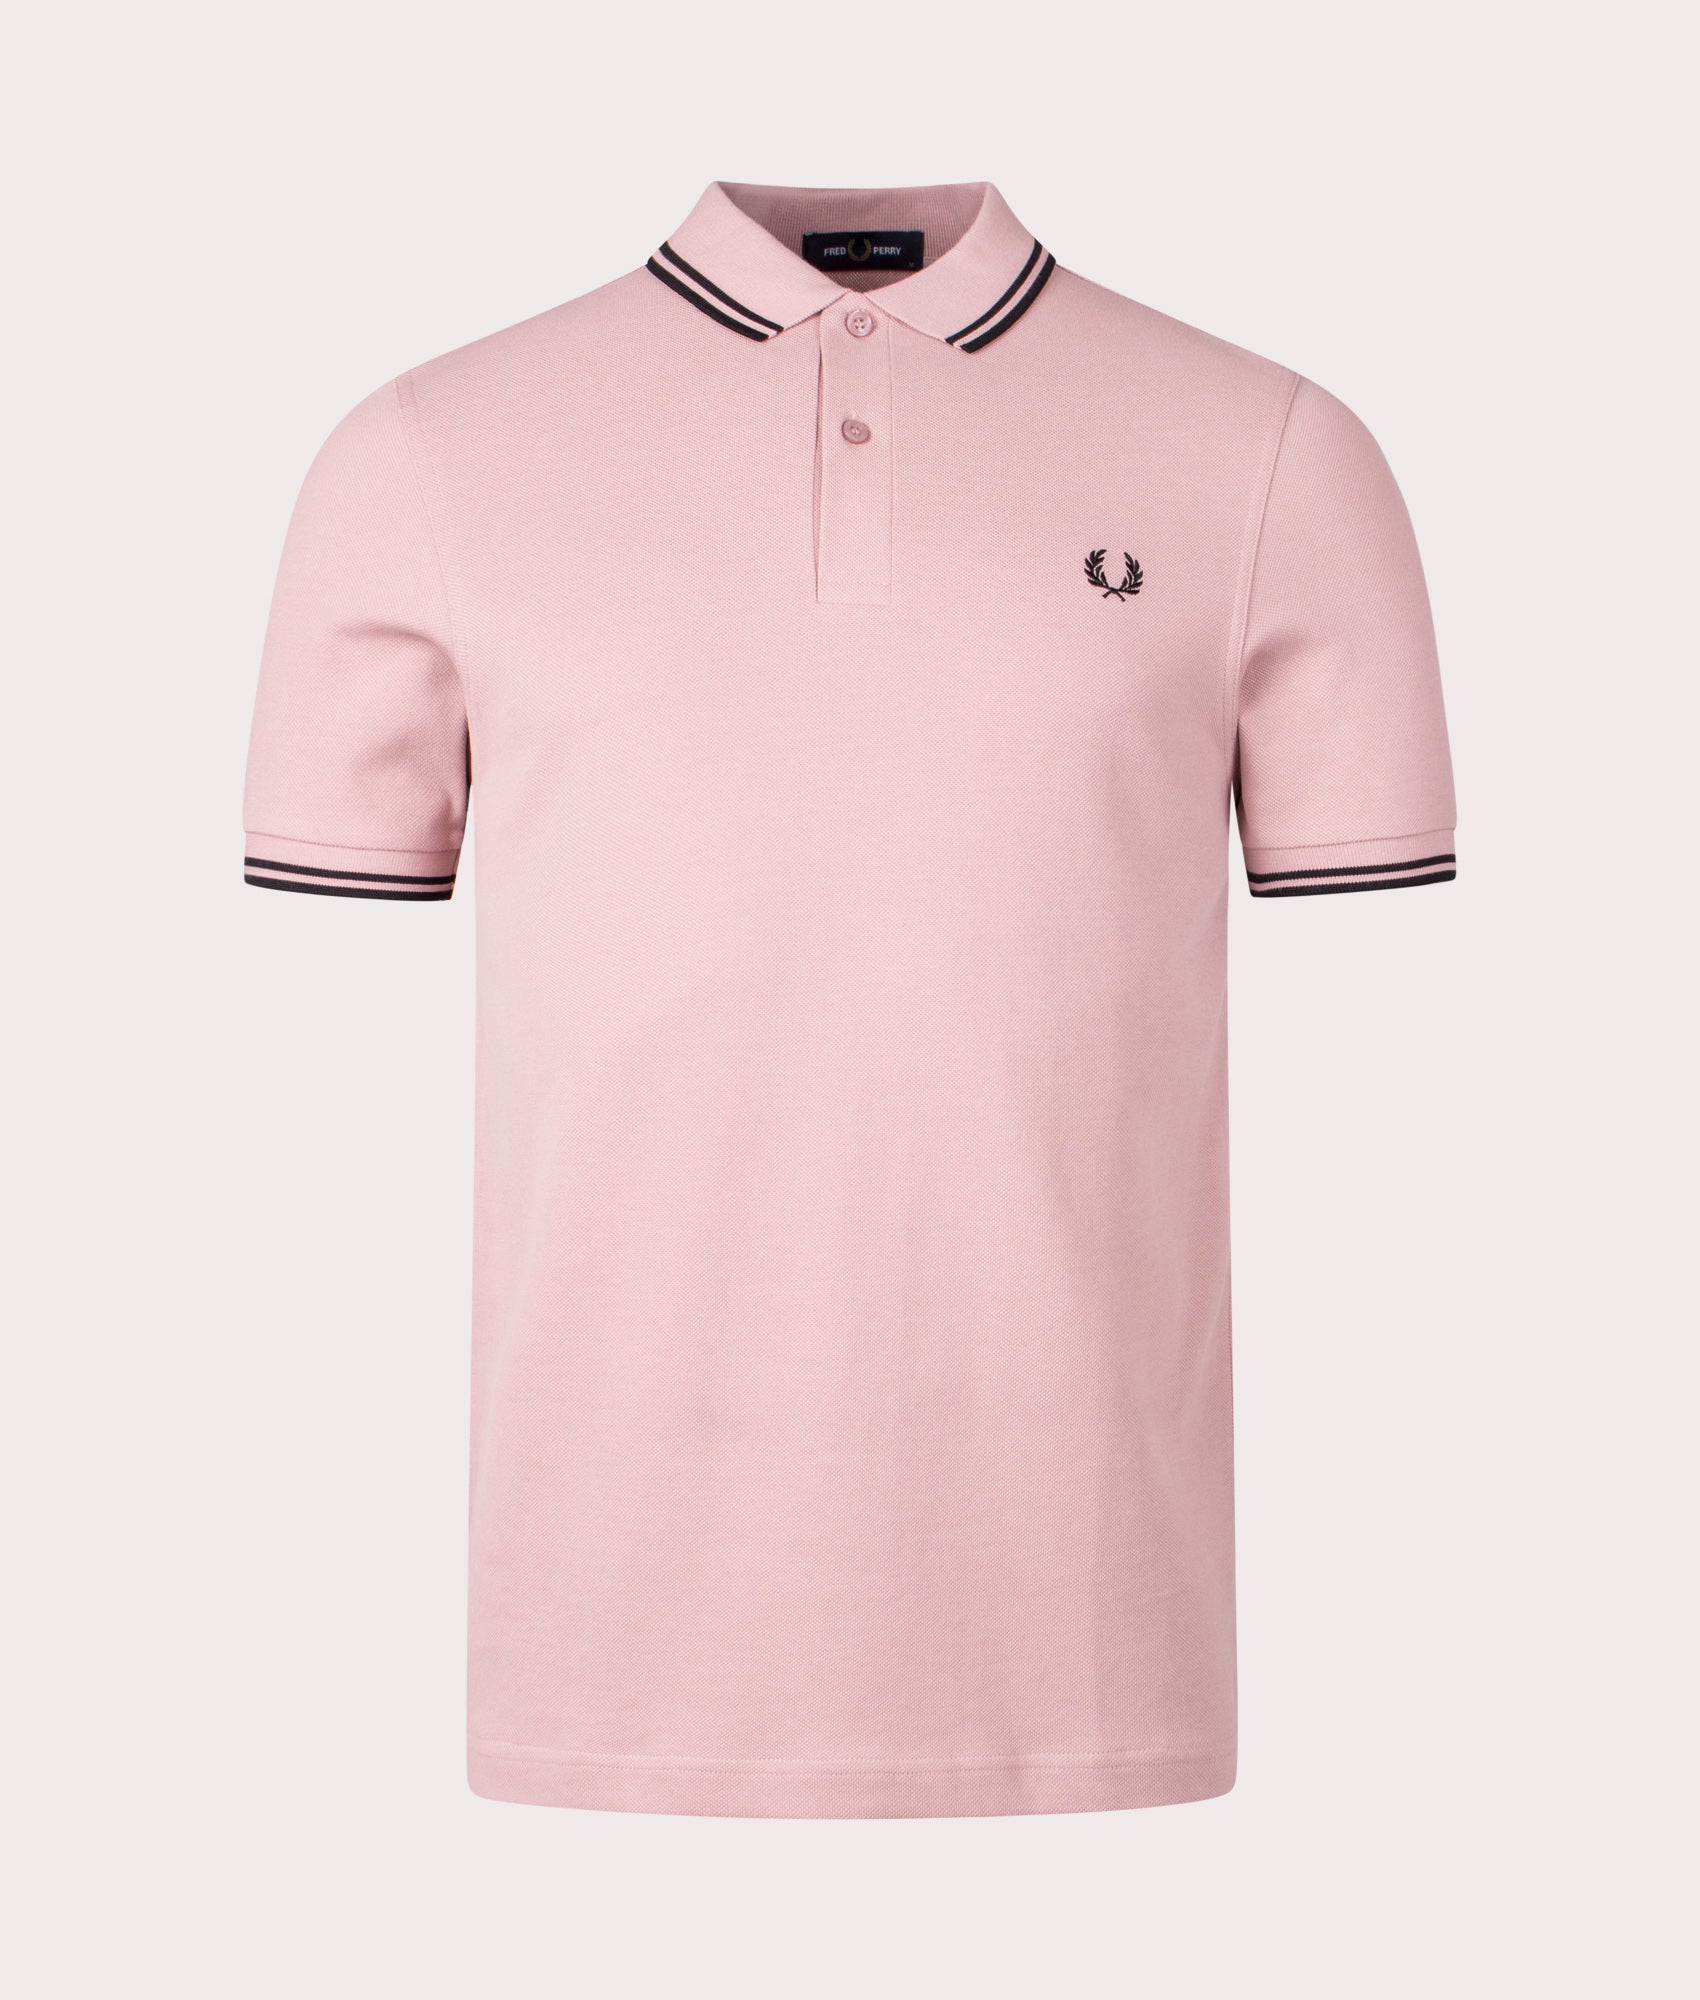 Fred Perry Mens Twin Tipped Fred Perry Polo Shirt - Colour: T89 Dusty Rose Pink/Black/Black - Size: 